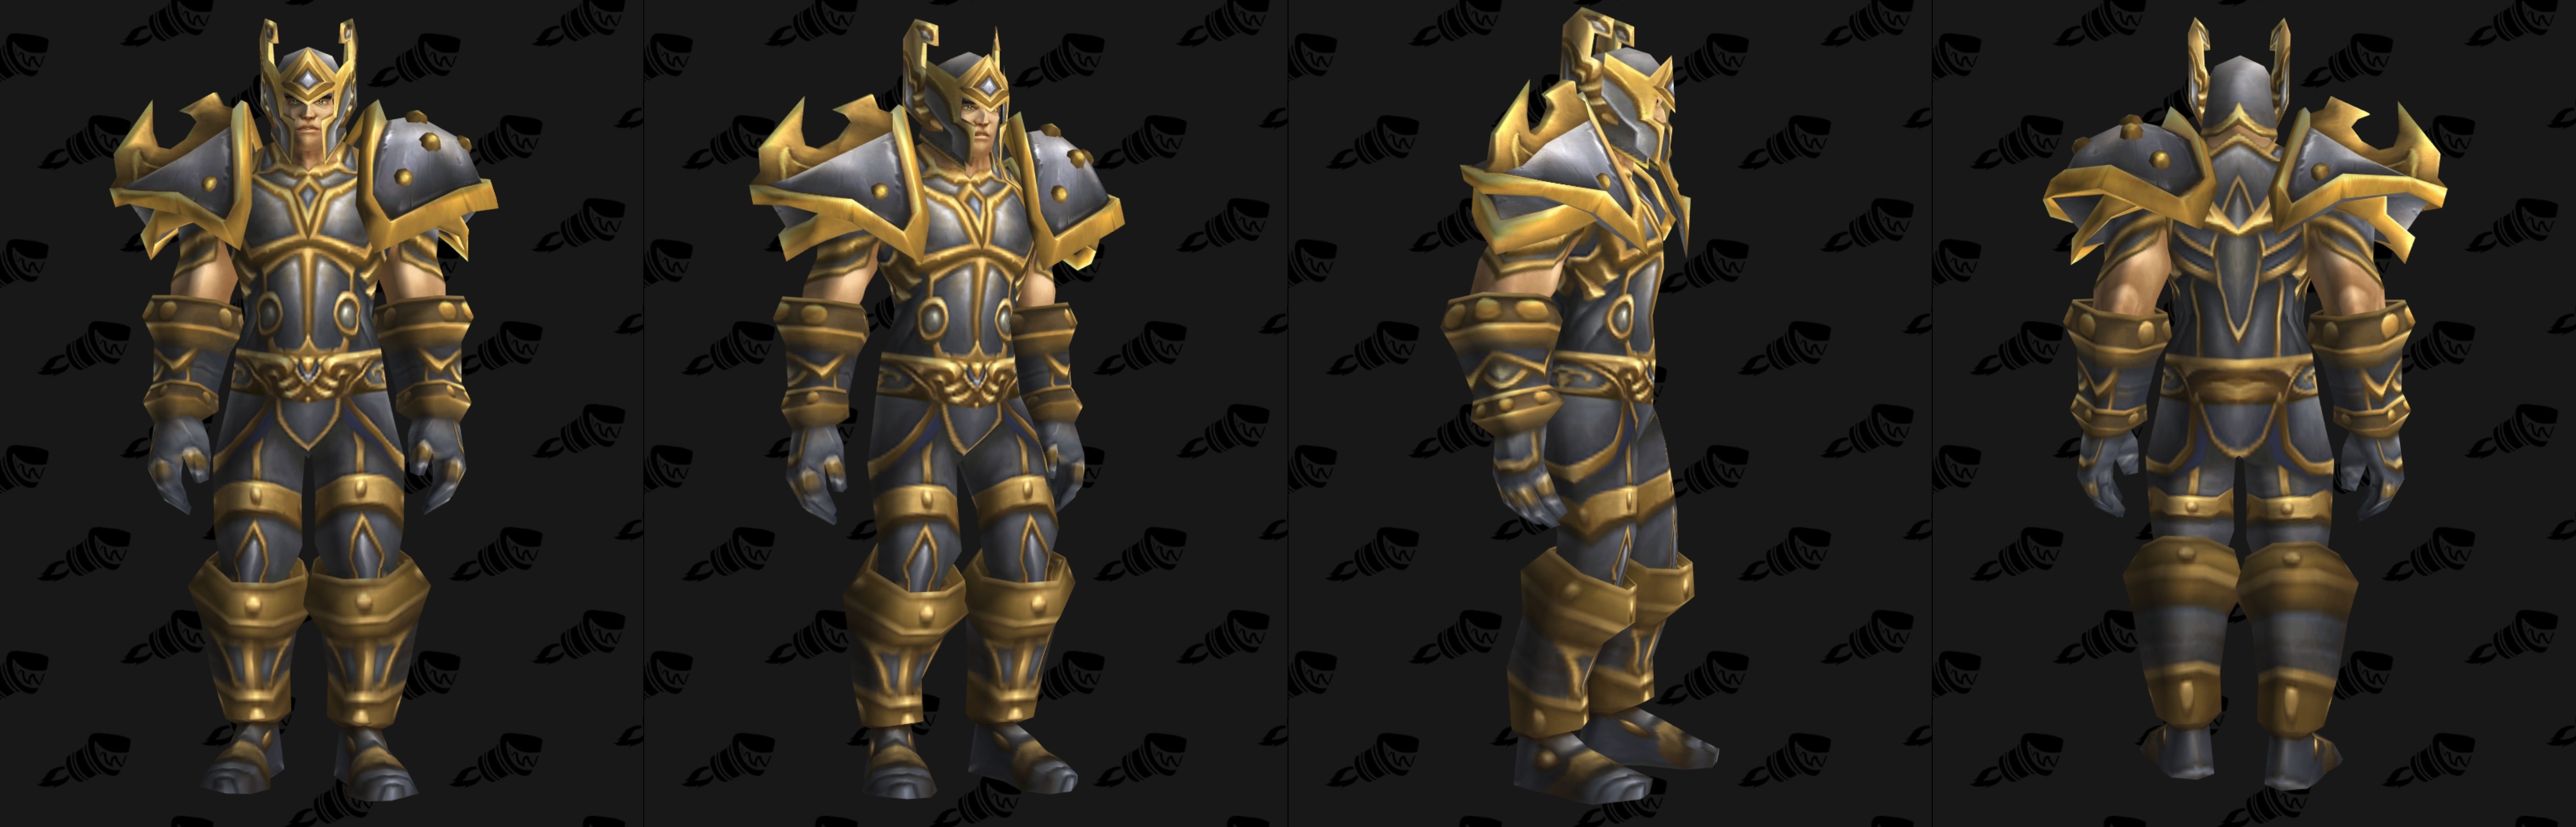 The Tier 0 Set or Dungeon Set 1 for Warriors is called. 